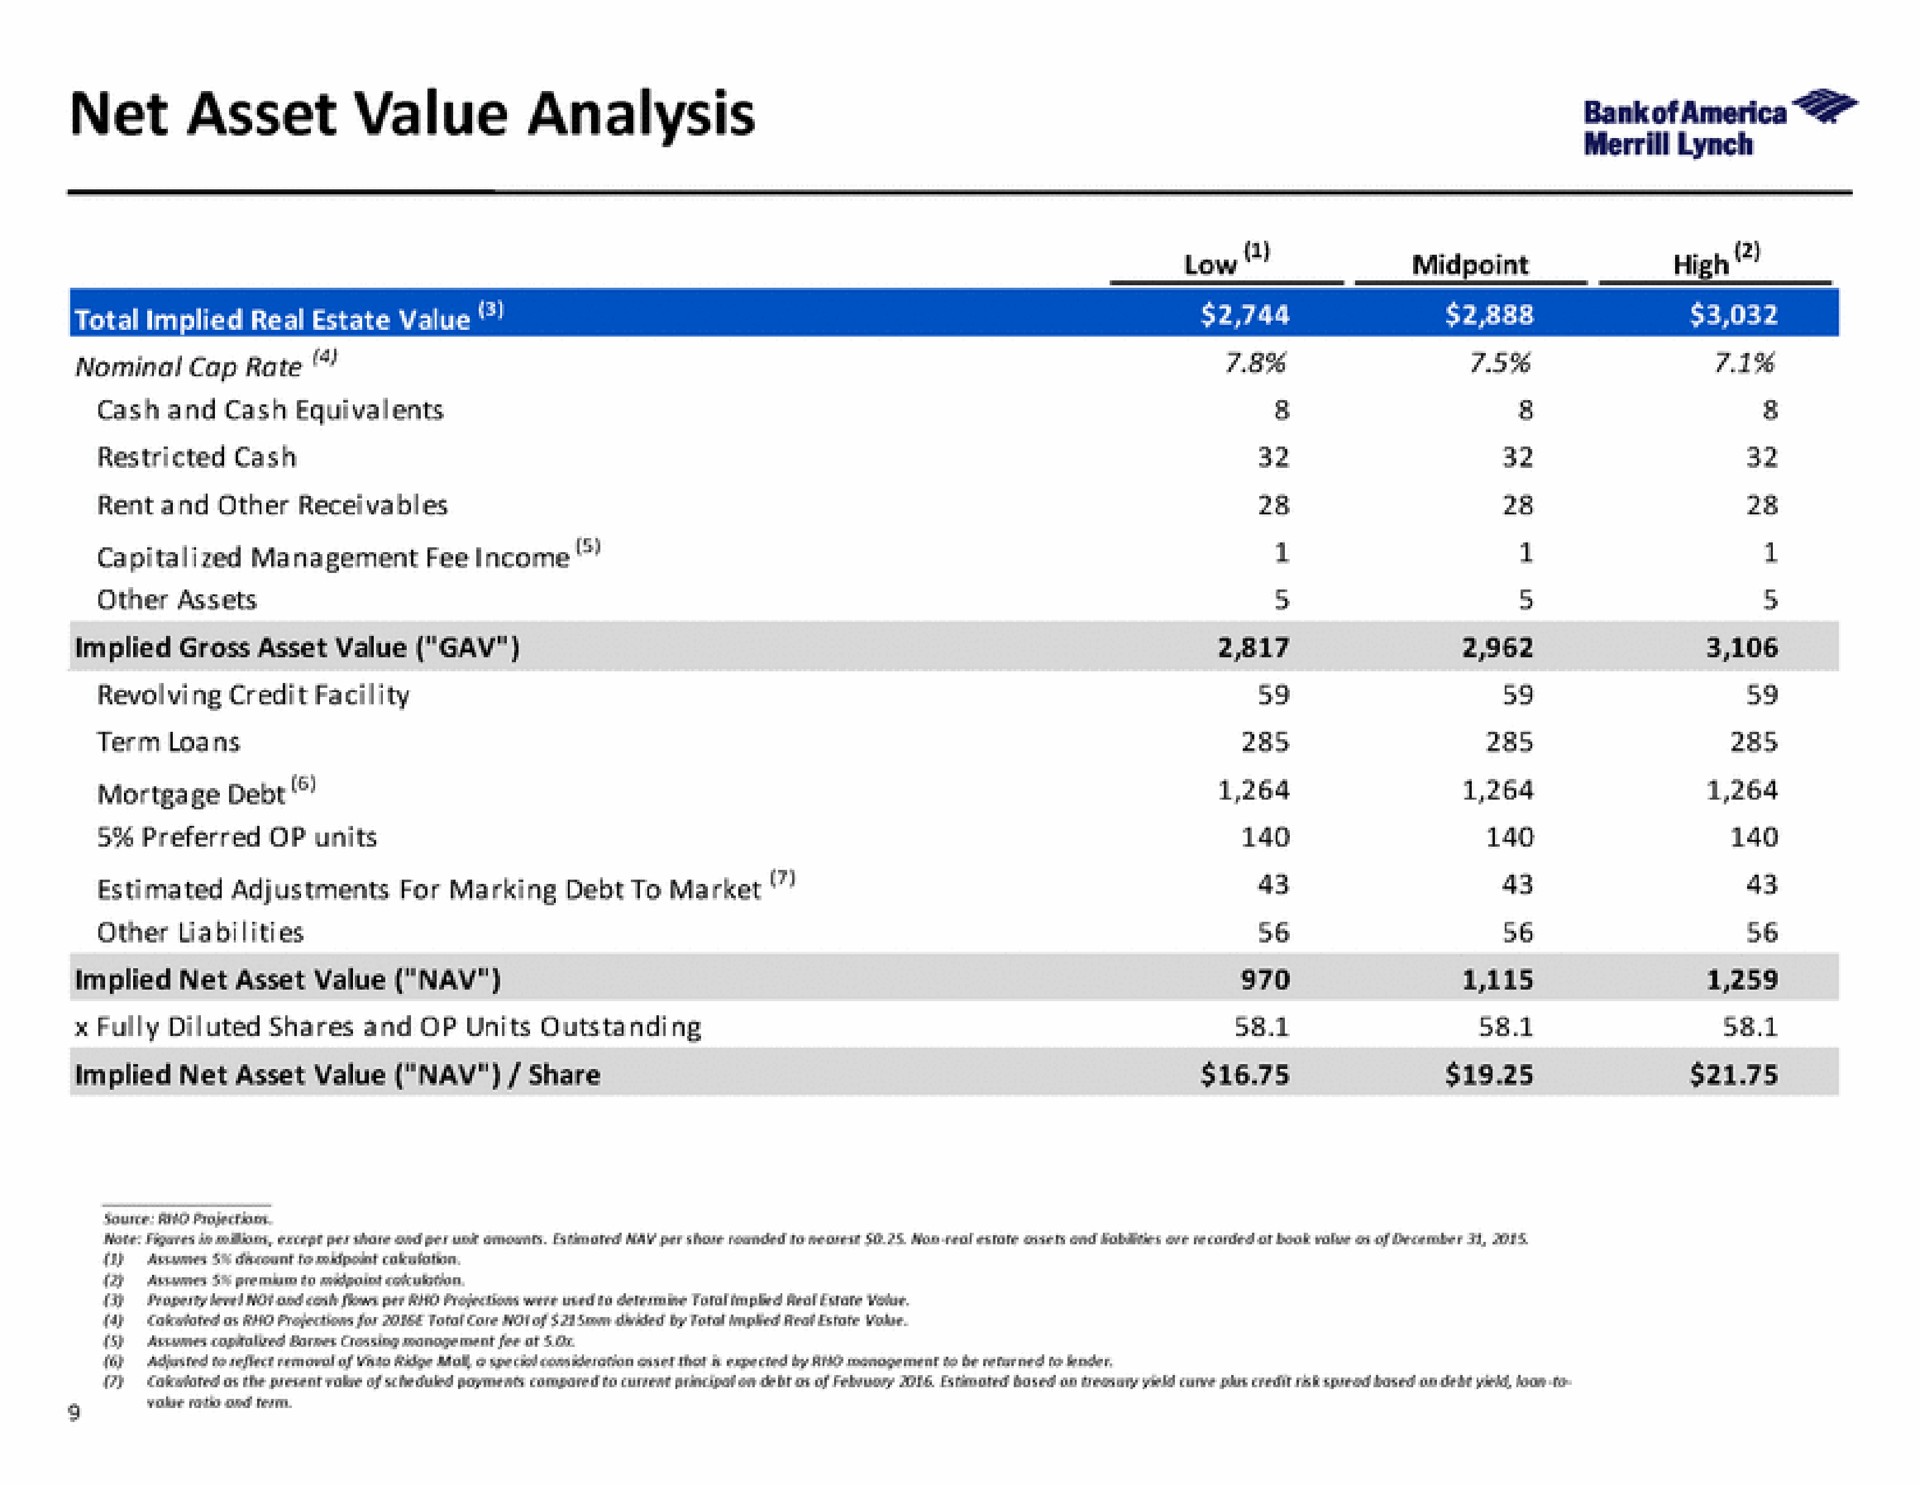 net asset value analysis mortgage debt low high | Bank of America